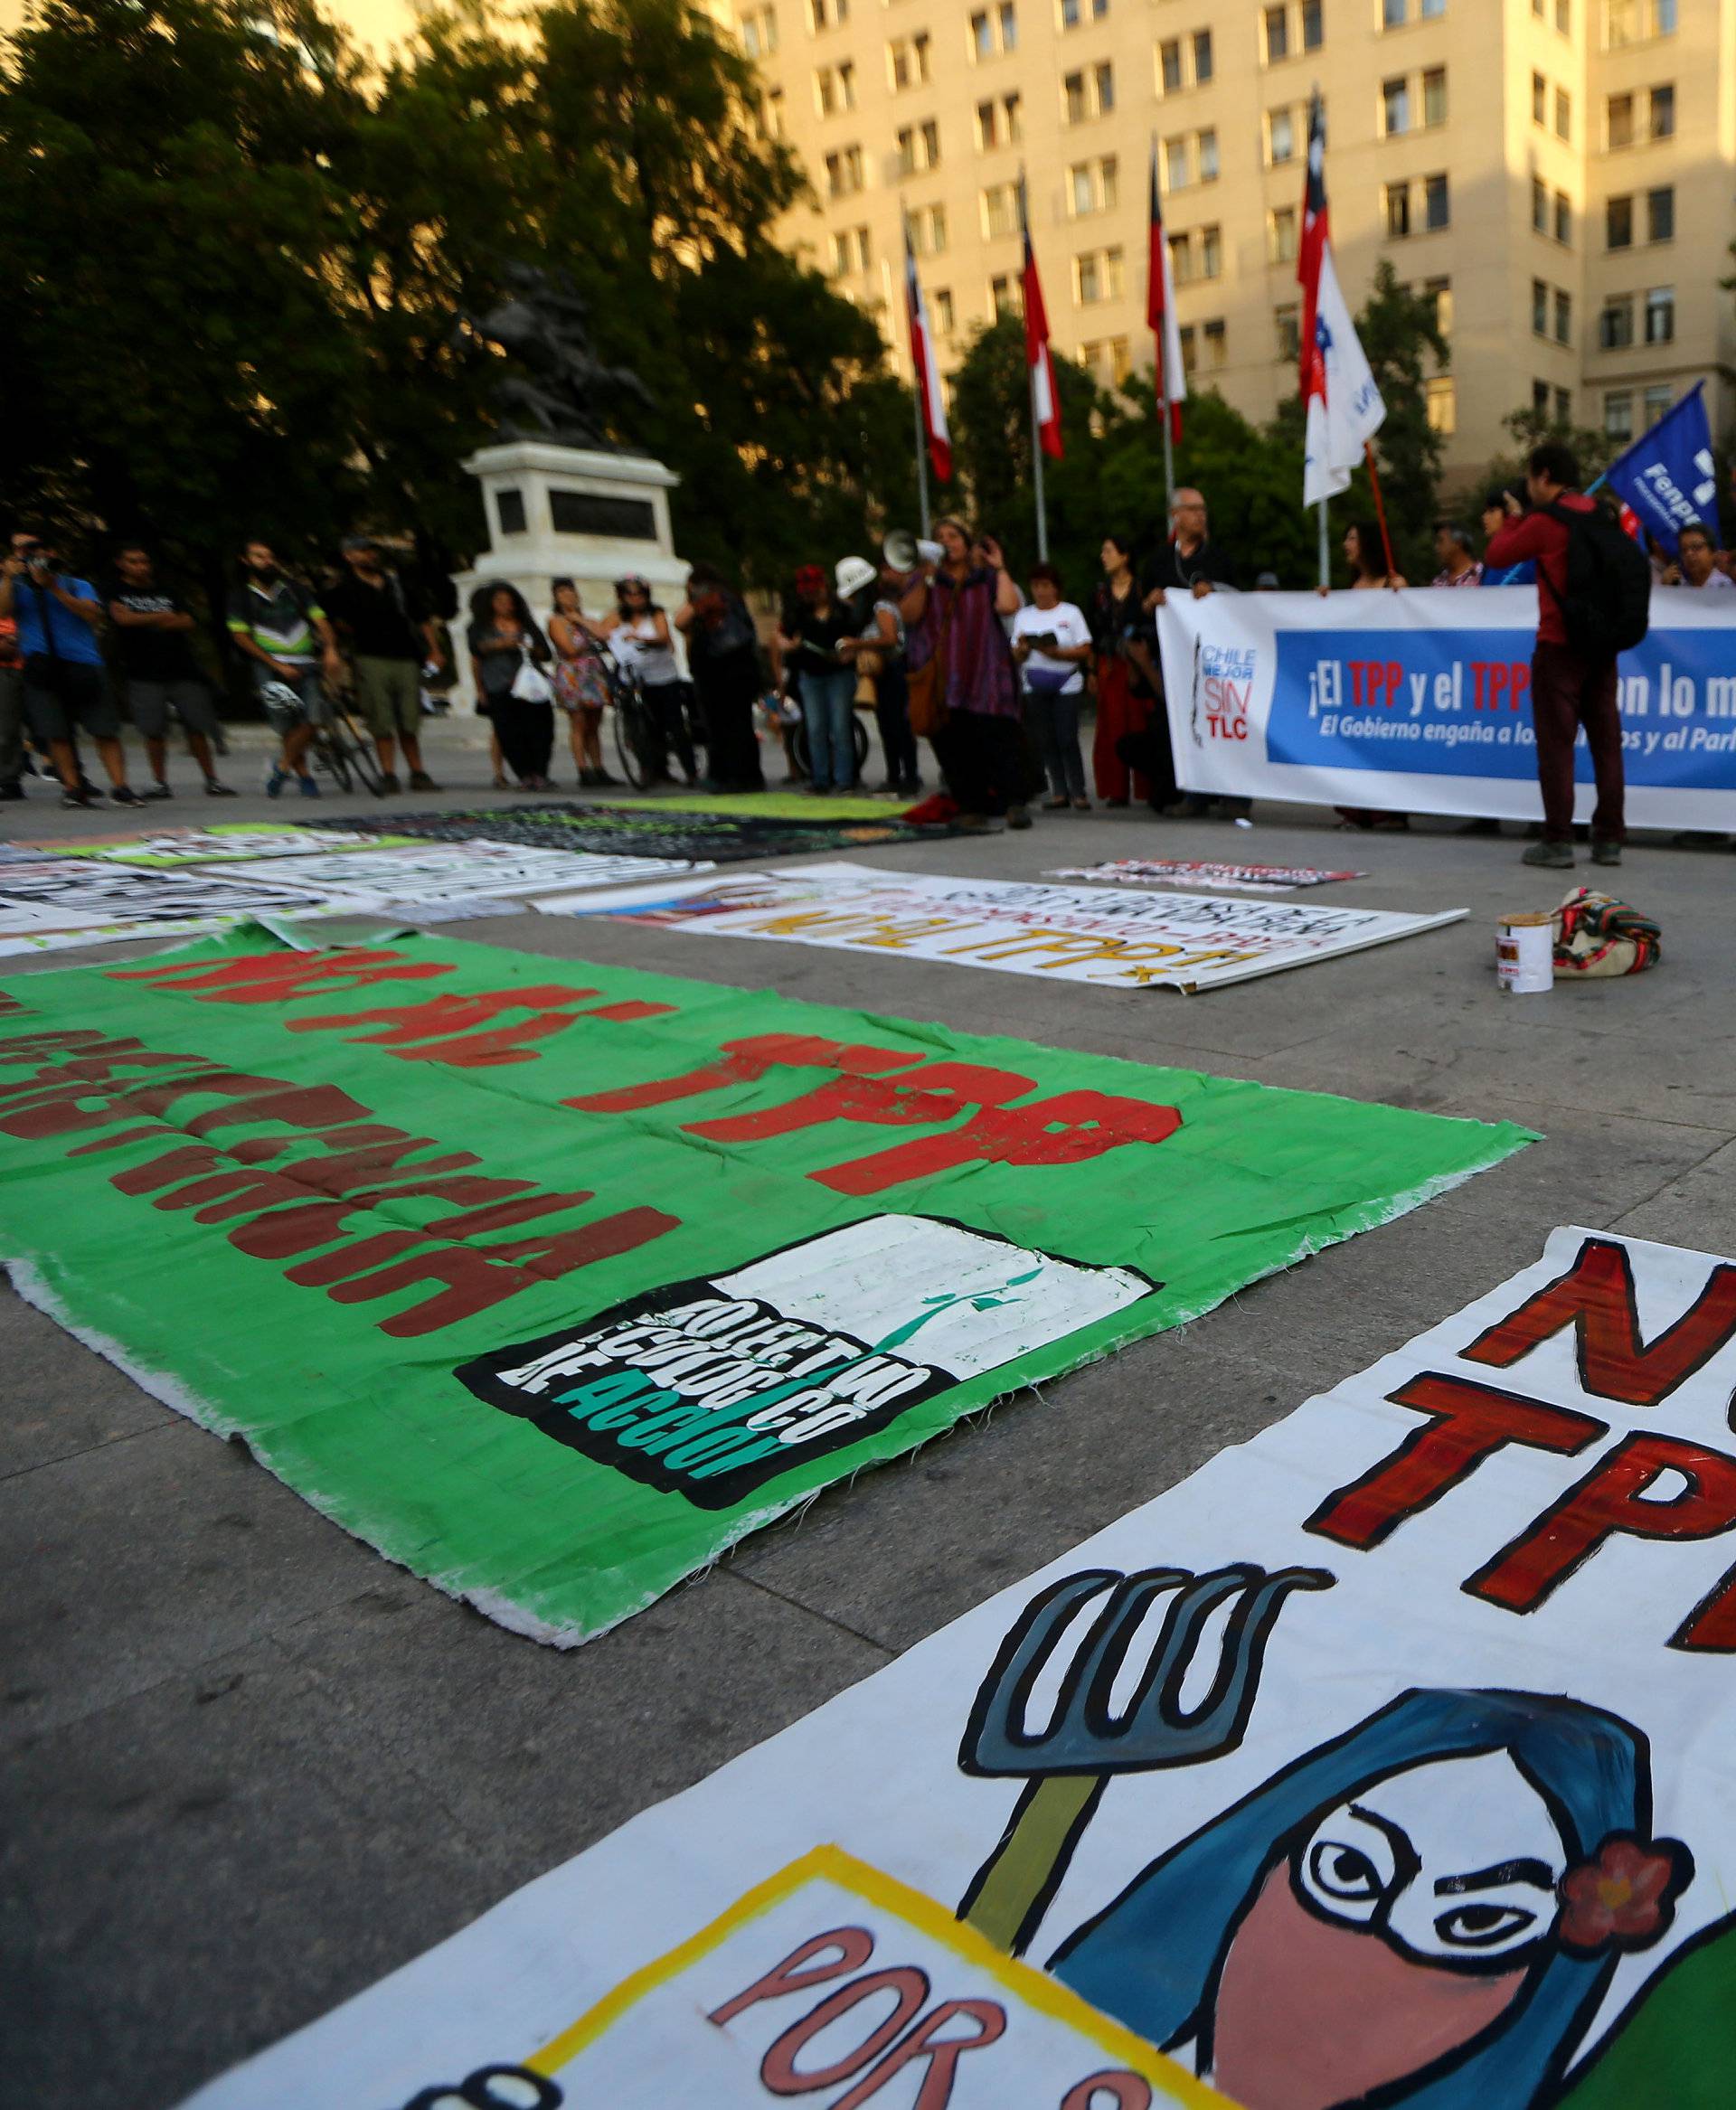 A banner reading "Not to TPP" lies on the ground during a rally against the Trans-Pacific Partnership (TPP) trade deal in Santiago,